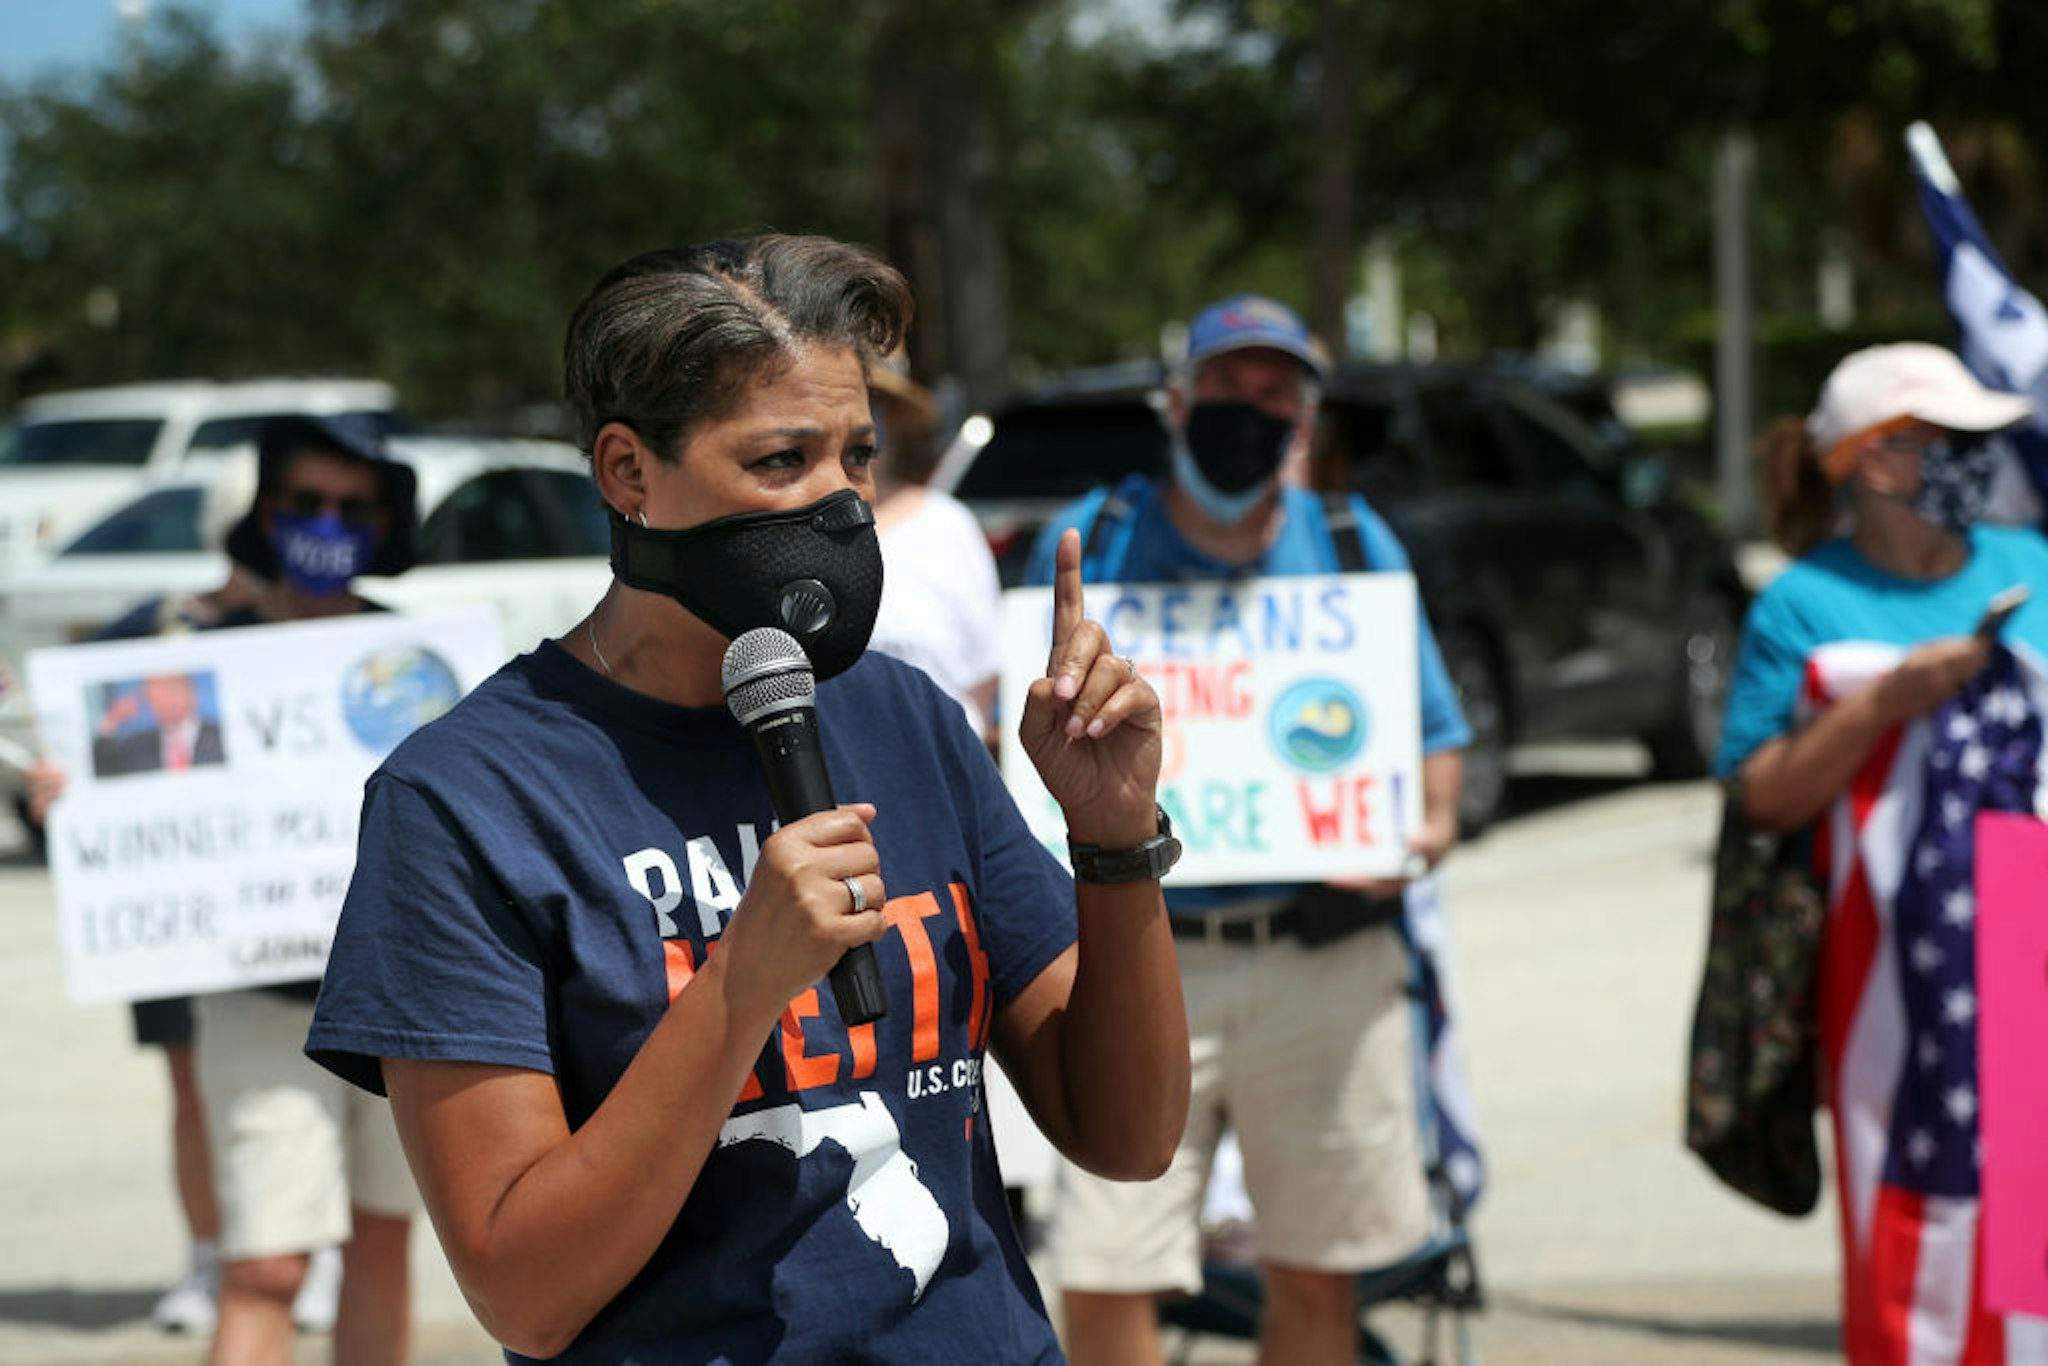 Congressional candidate Pam Keith, who is running against Rep. Brian Mast, speaks to anti-Trump protesters at Burt Reynolds Park in Jupiter, Florida on Tuesday, Sept. 8, 2020. President Donald Trump made an appearance at the Jupiter Inlet Lighthouse touting his environmental policies and announcing he's extending the moratorium on offshore oil drilling in Florida.